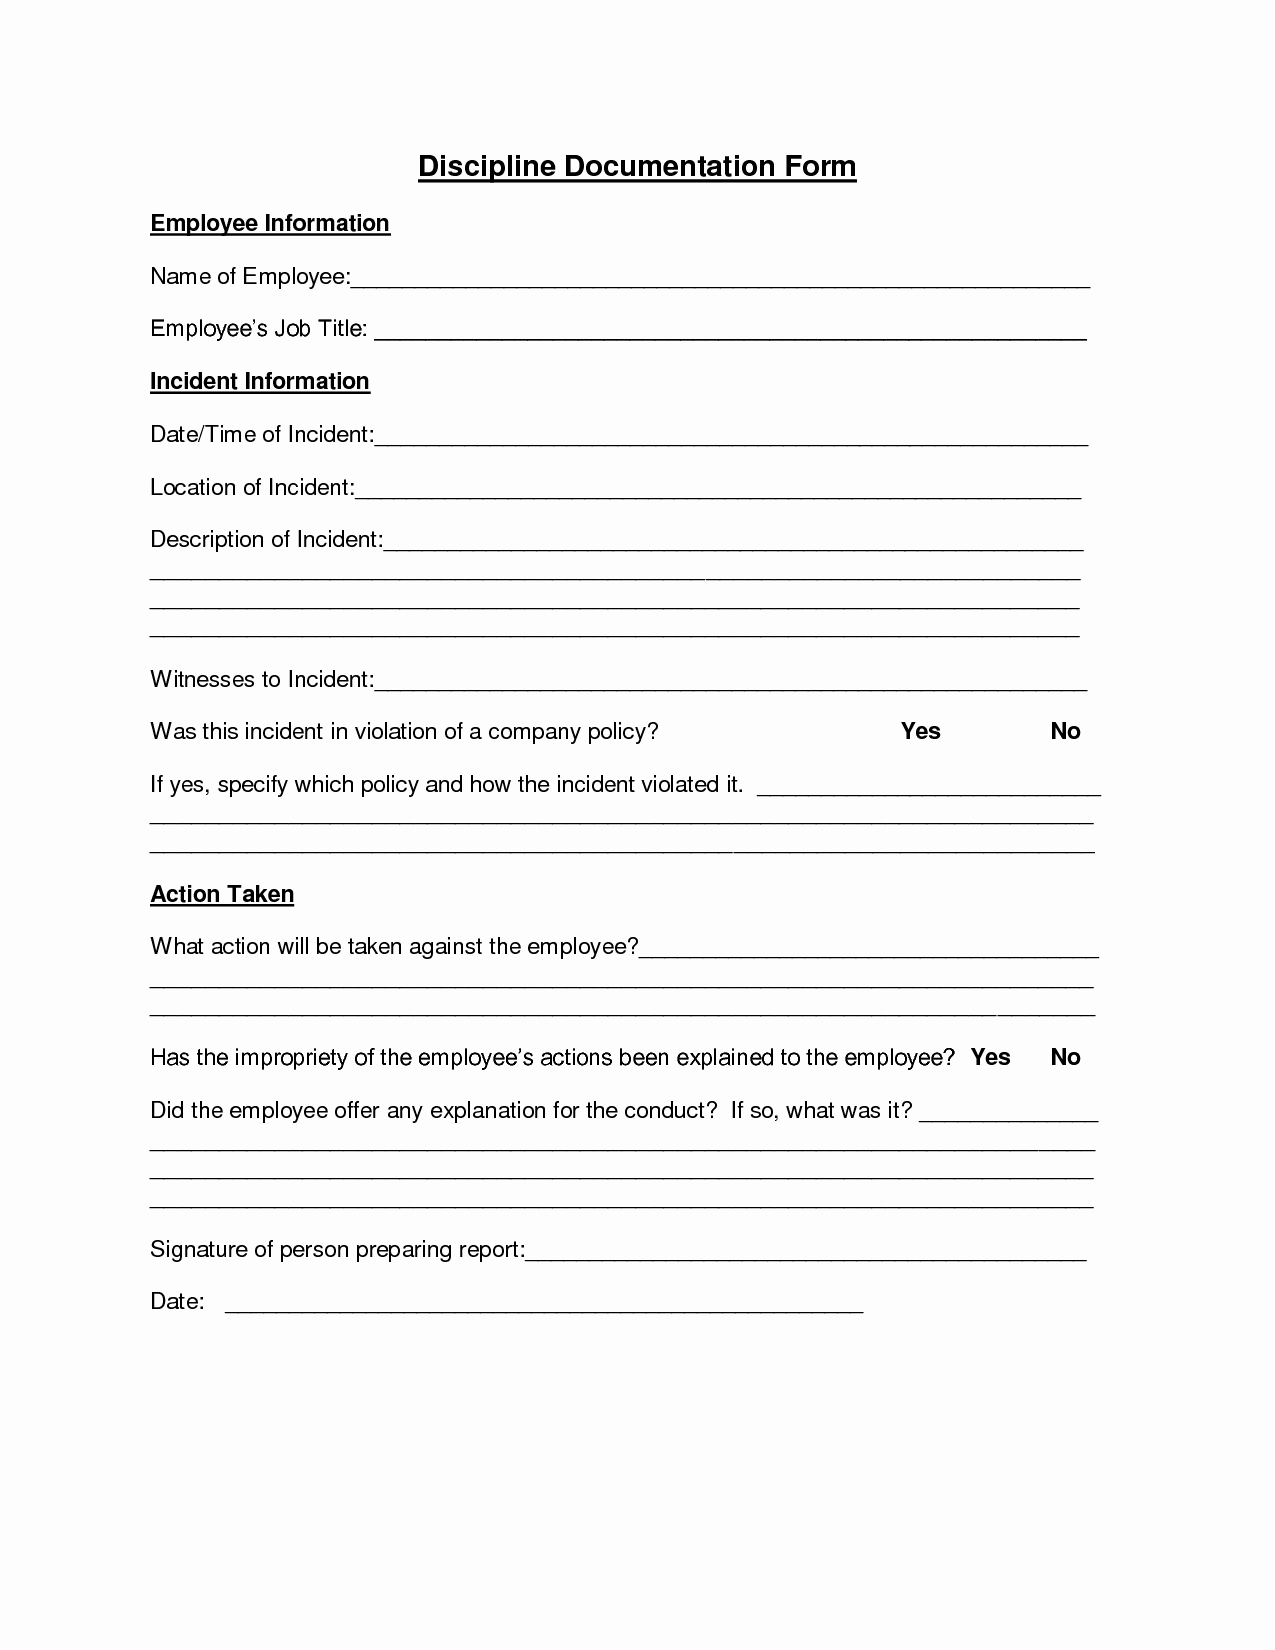 Employee Disciplinary form Template Free New Employee Discipline form